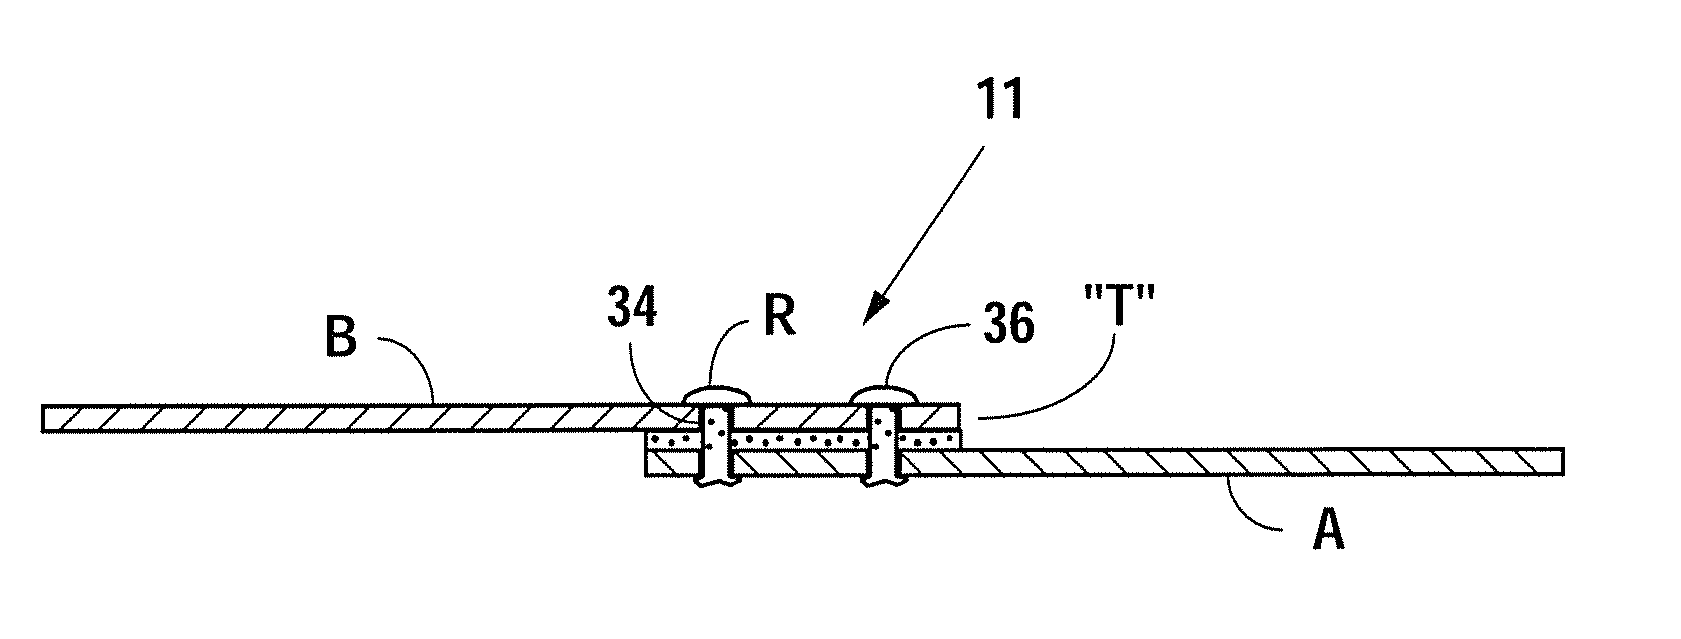 Thin gel gasket and a method of making and using the same